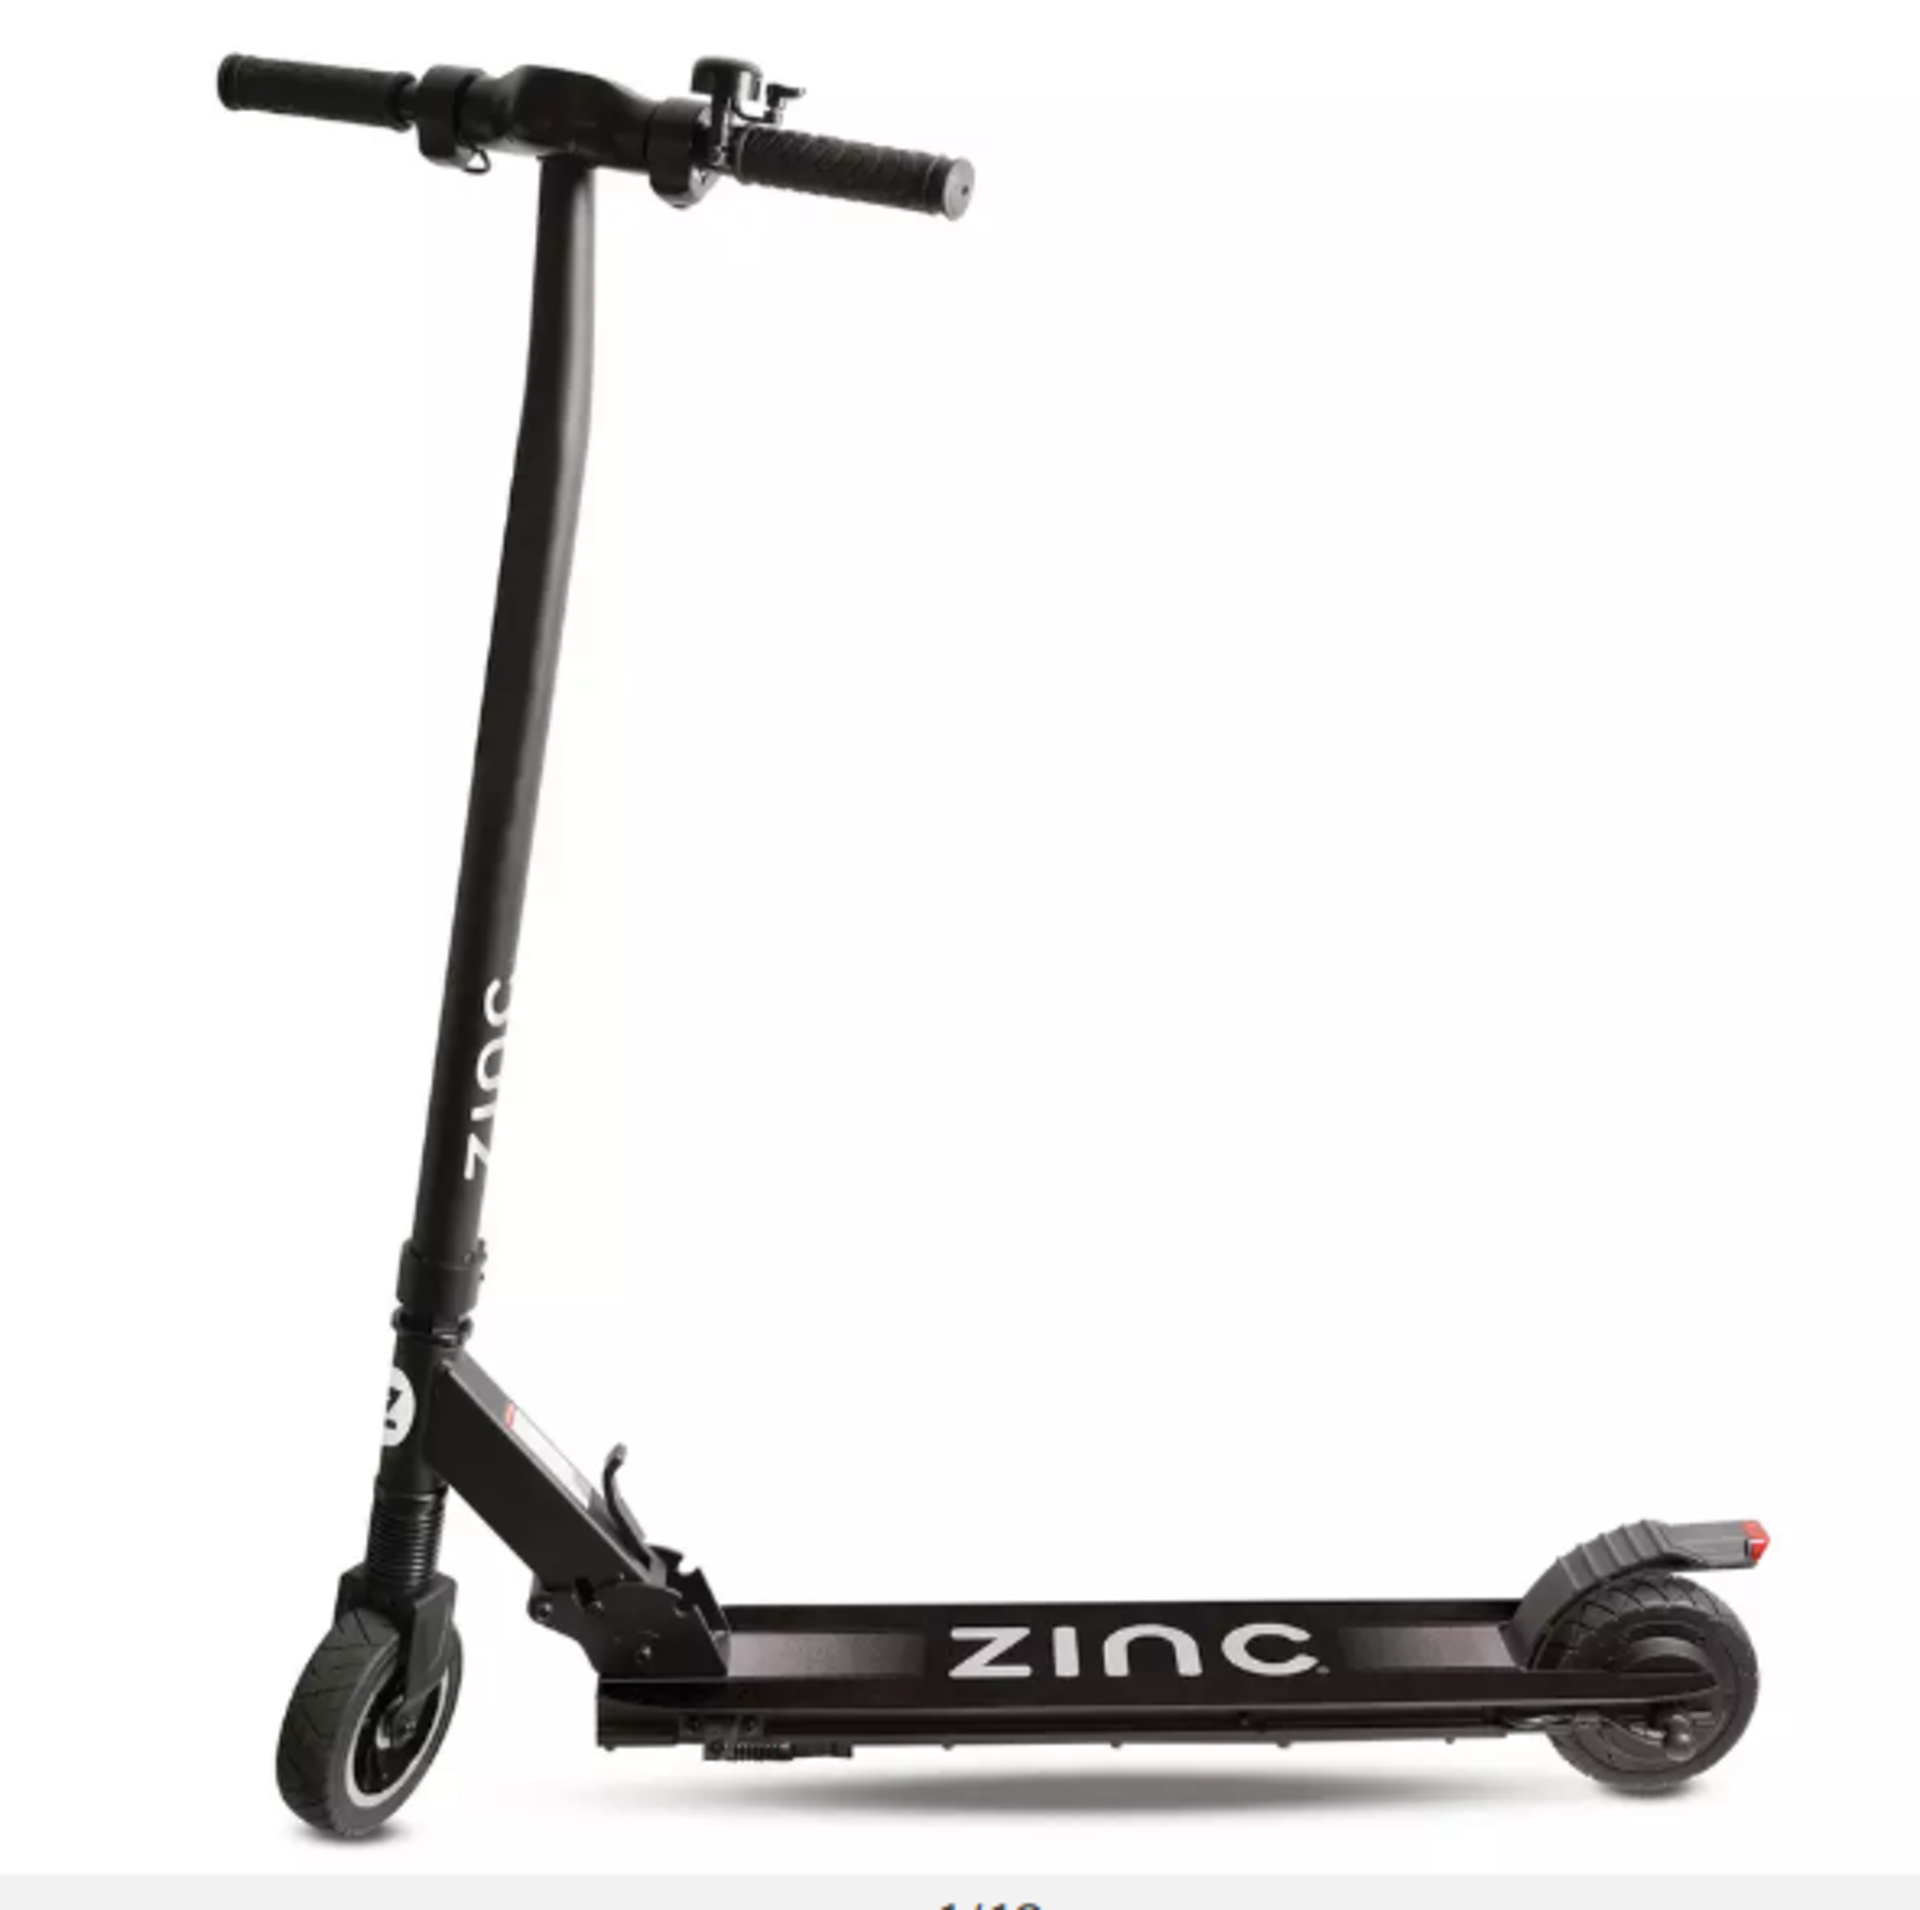 Zinc Eco 6 Inch Solid Rubber Electric Scooter. RRP £350.00. The Zinc folding electric Eco is a